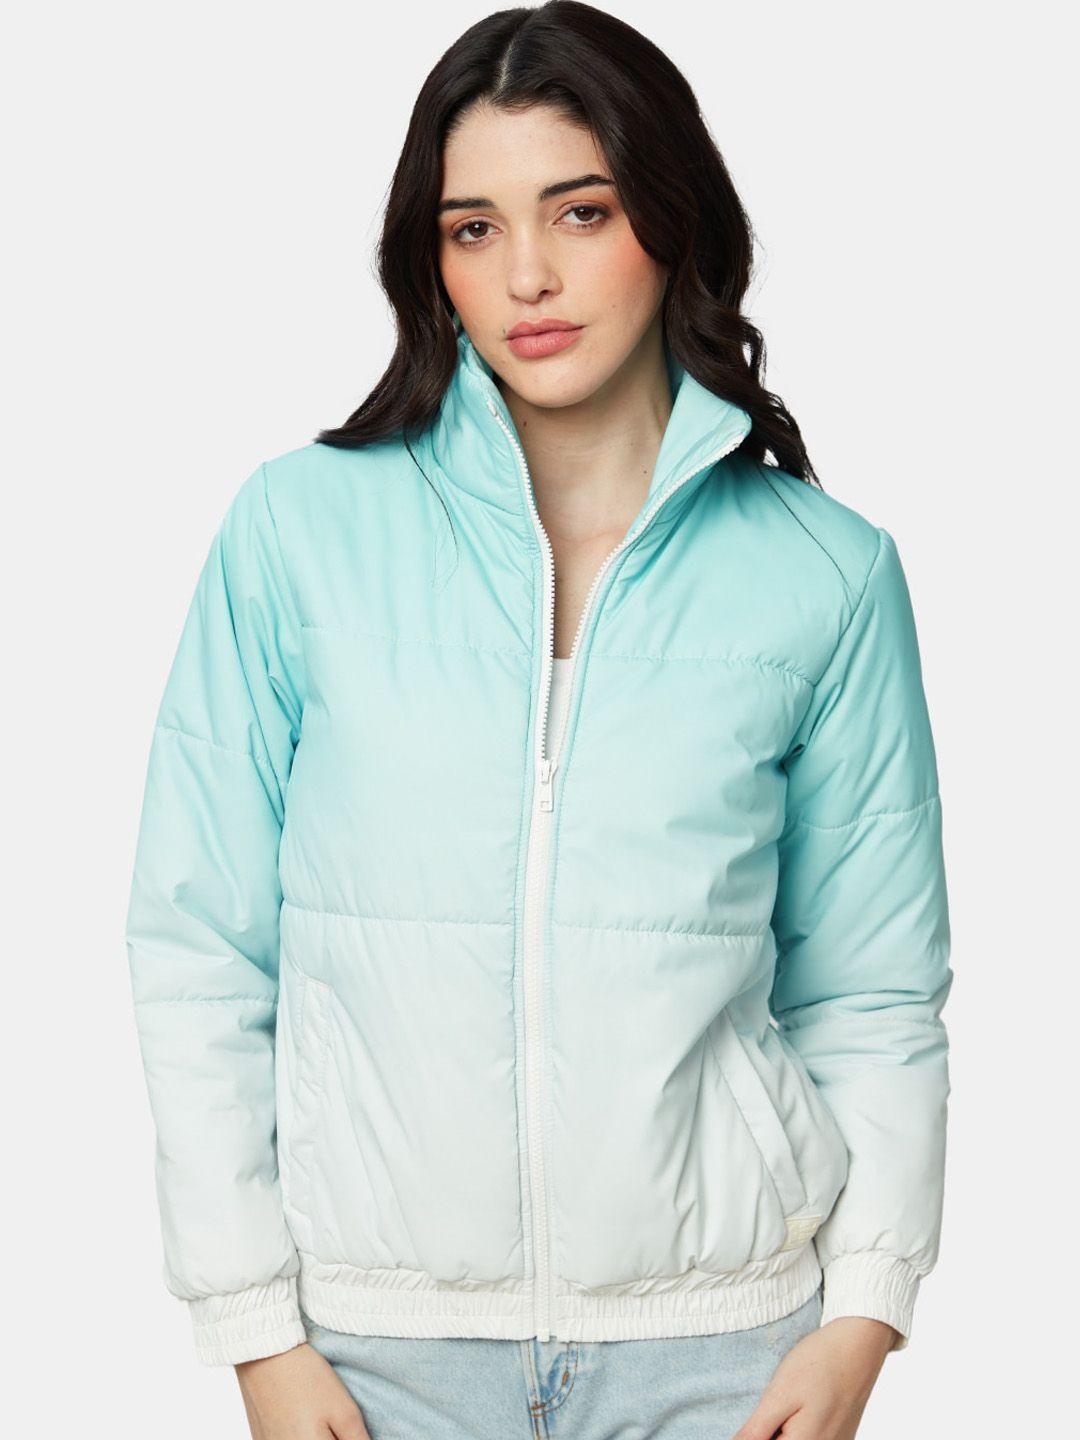 The Souled Store Women Ombre Crop Puffer Jacket